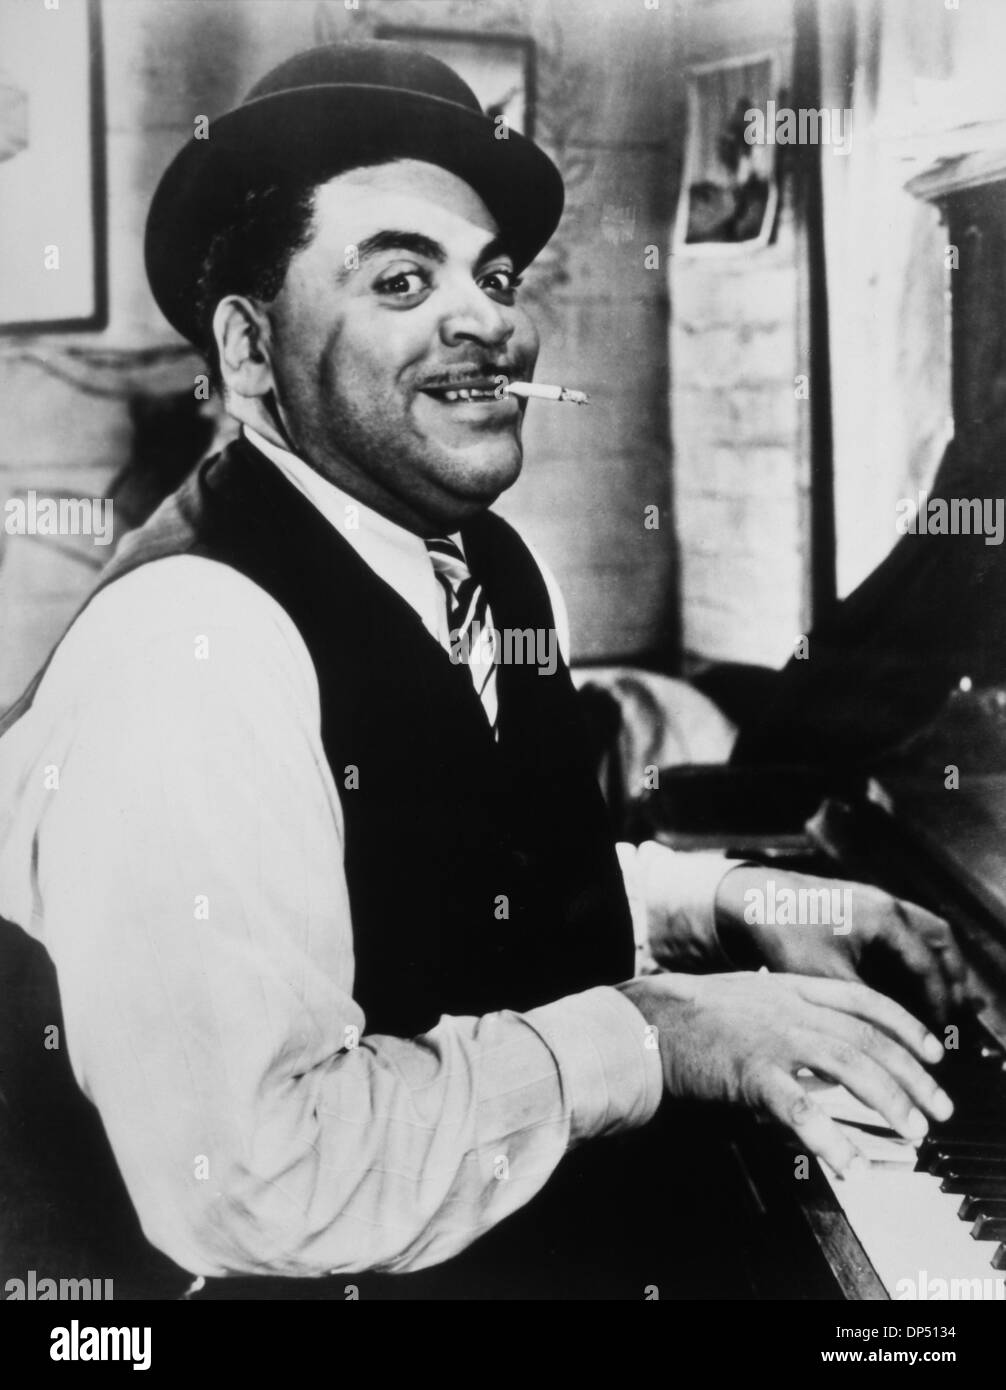 Fats Waller (1904-1943), American Jazz Pianist, Composer and Singer, Playing Piano while Smoking Cigarette, 1942 Stock Photo